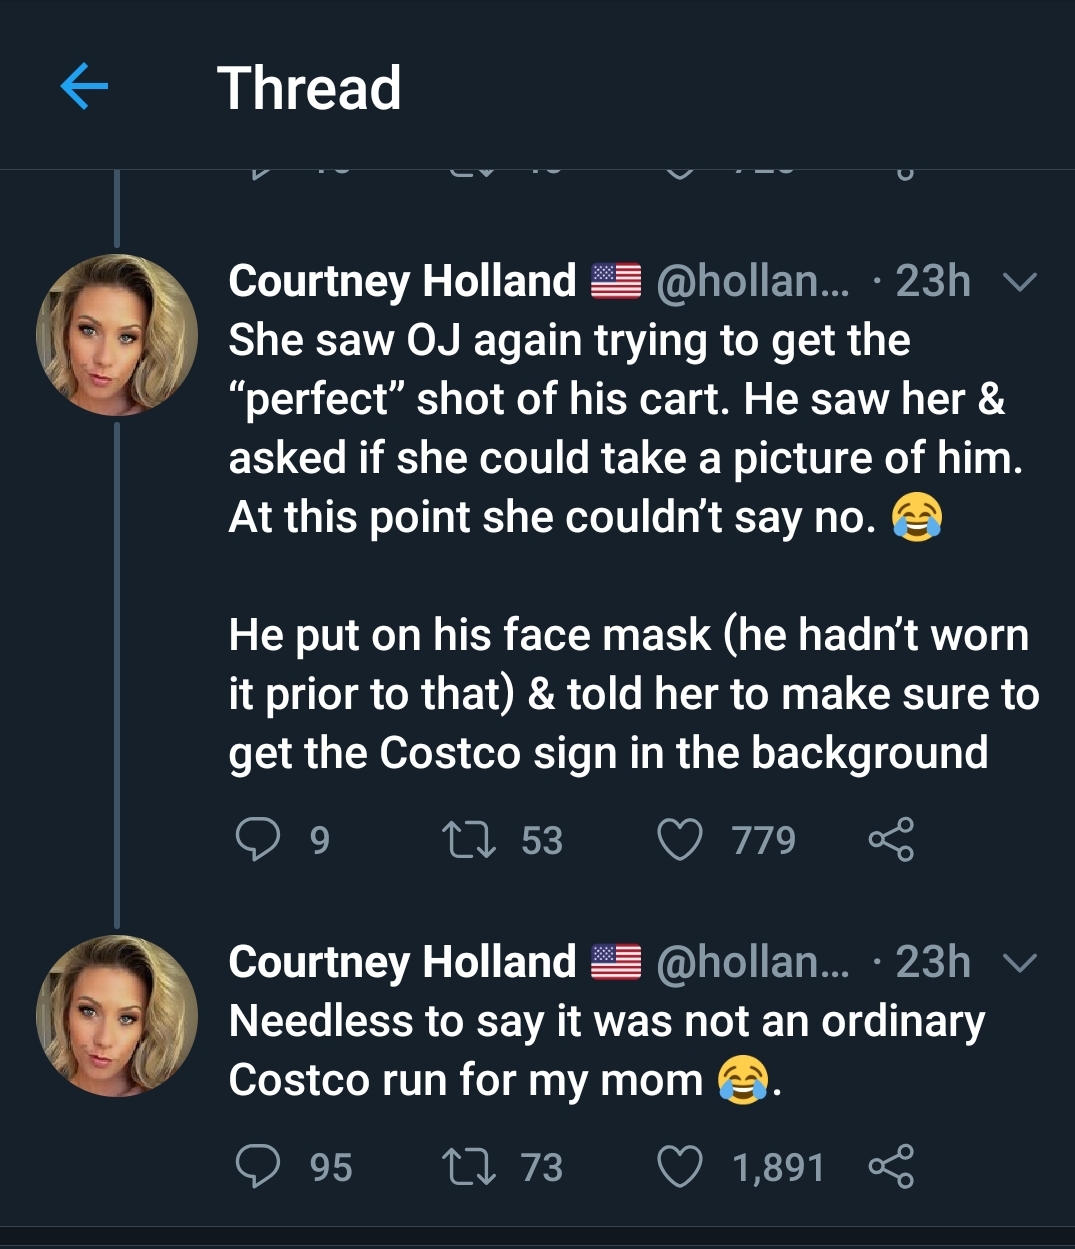 screenshot - Thread Giv Courtney Holland ... 23h v She saw Oj again trying to get the "perfect shot of his cart. He saw her & asked if she could take a picture of him. At this point she couldn't say no. He put on his face mask he hadn't worn it prior to t